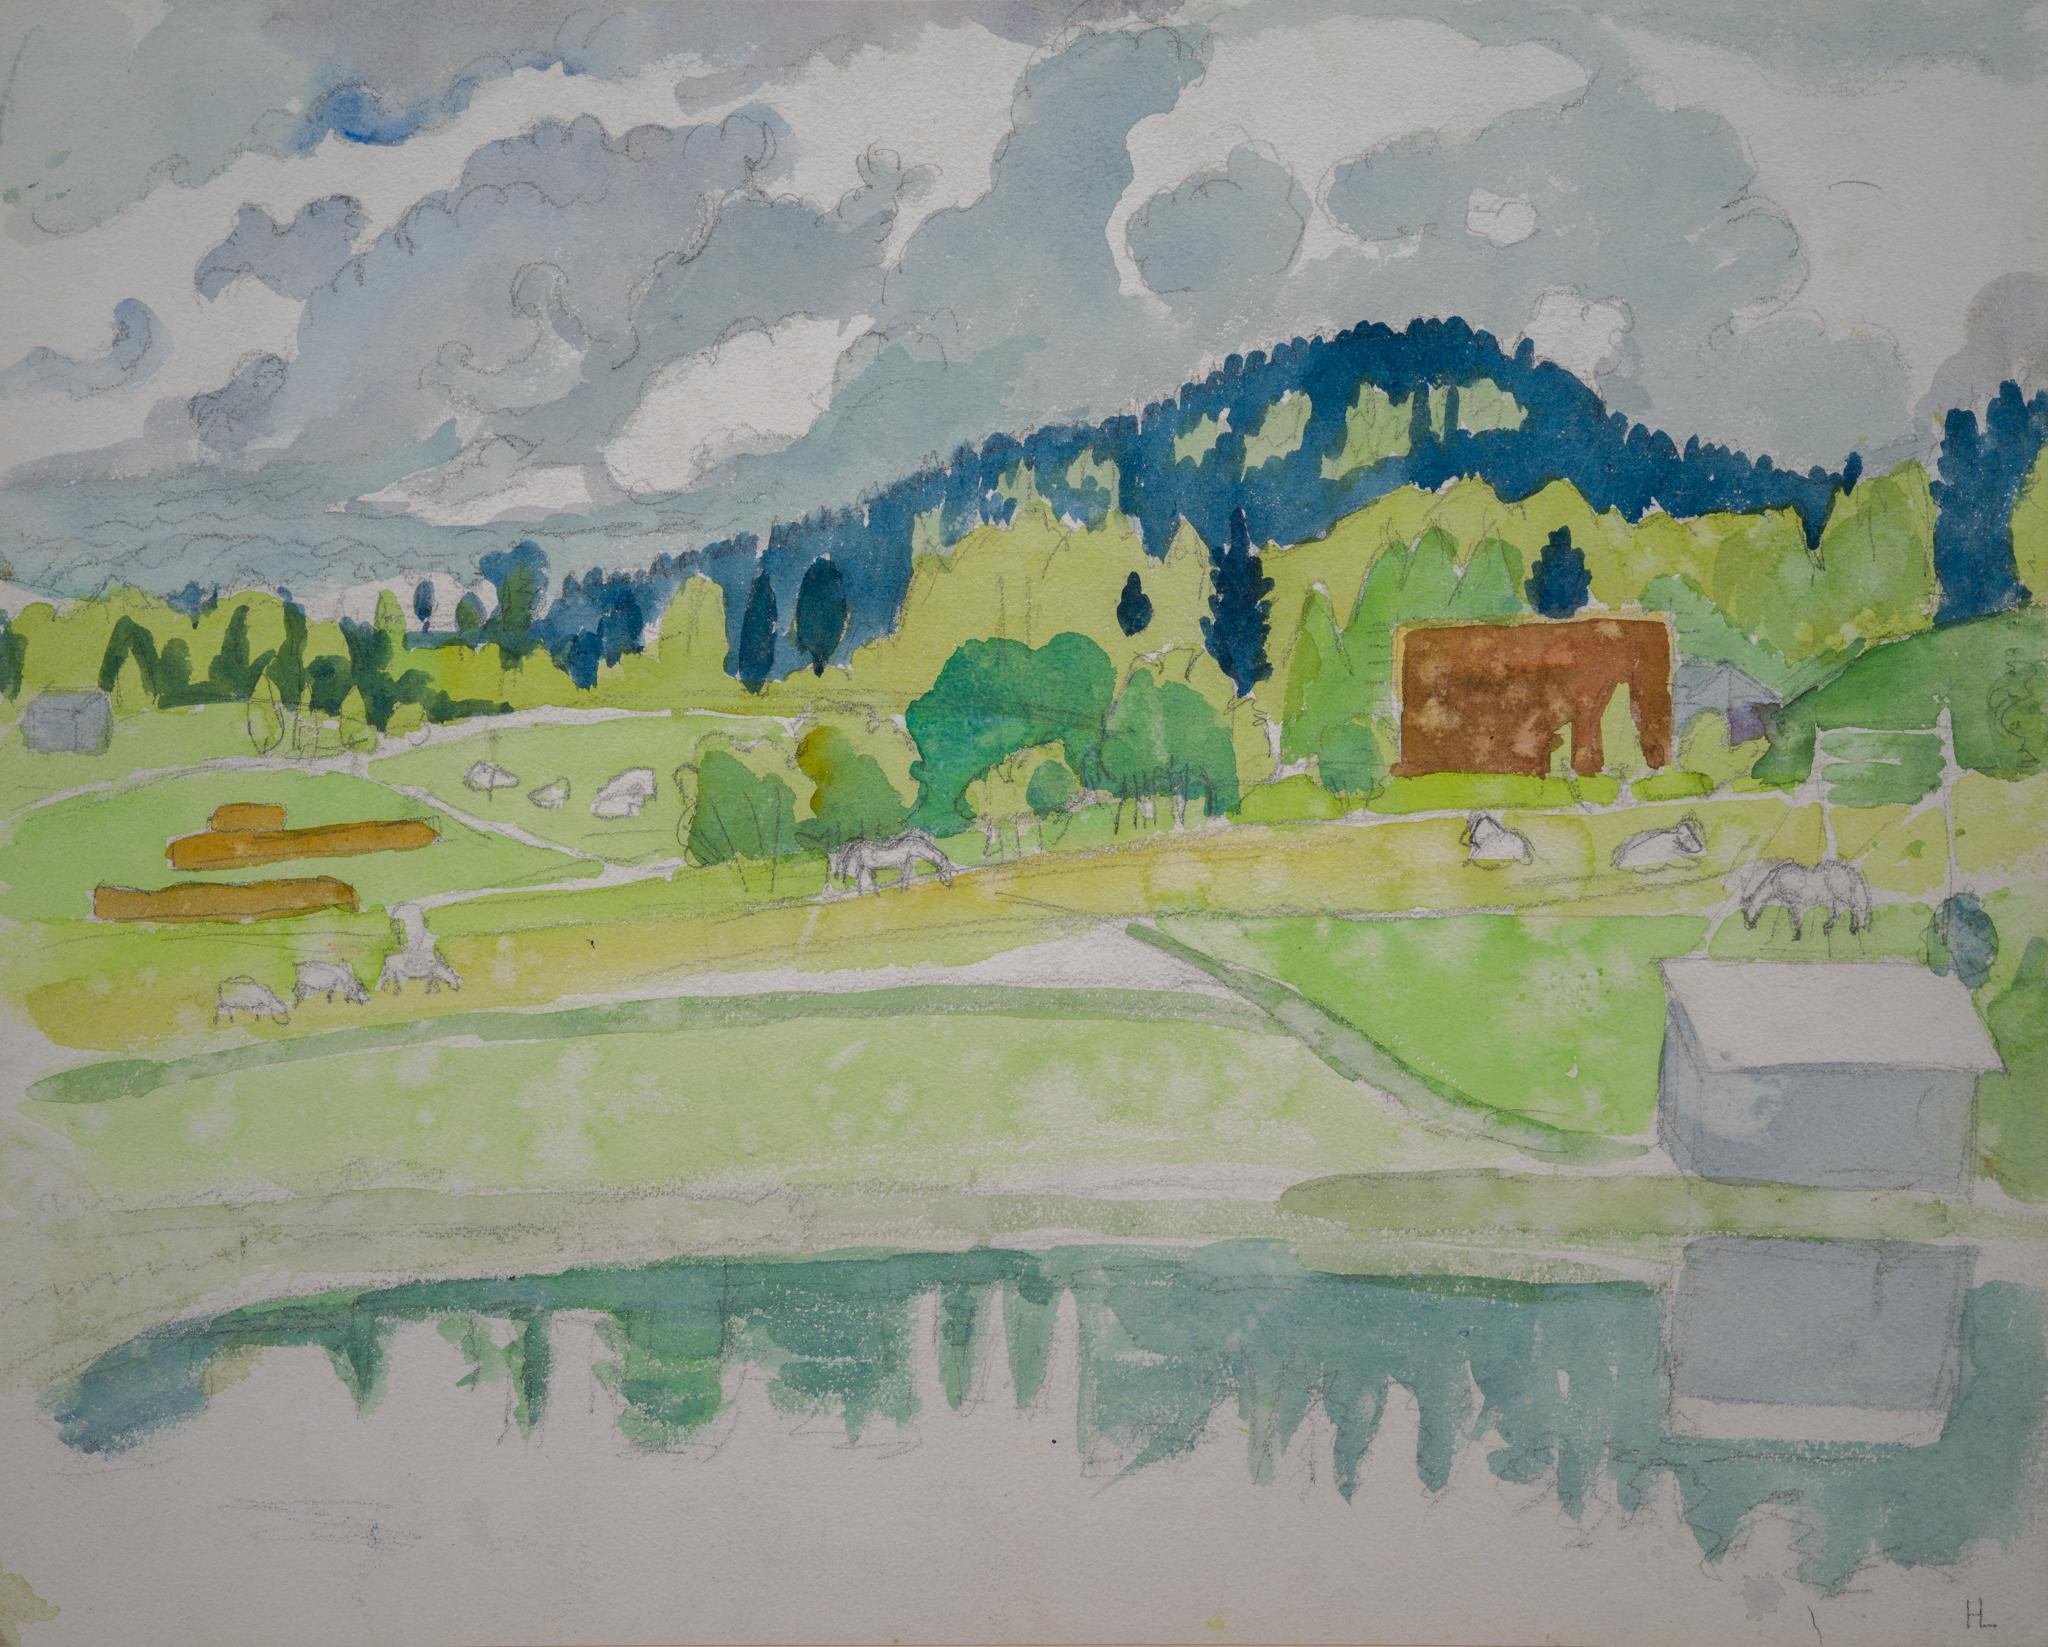 A Rural Landscape With Cows and Horses, Watercolor by Hilding Linnqvist For Sale 1